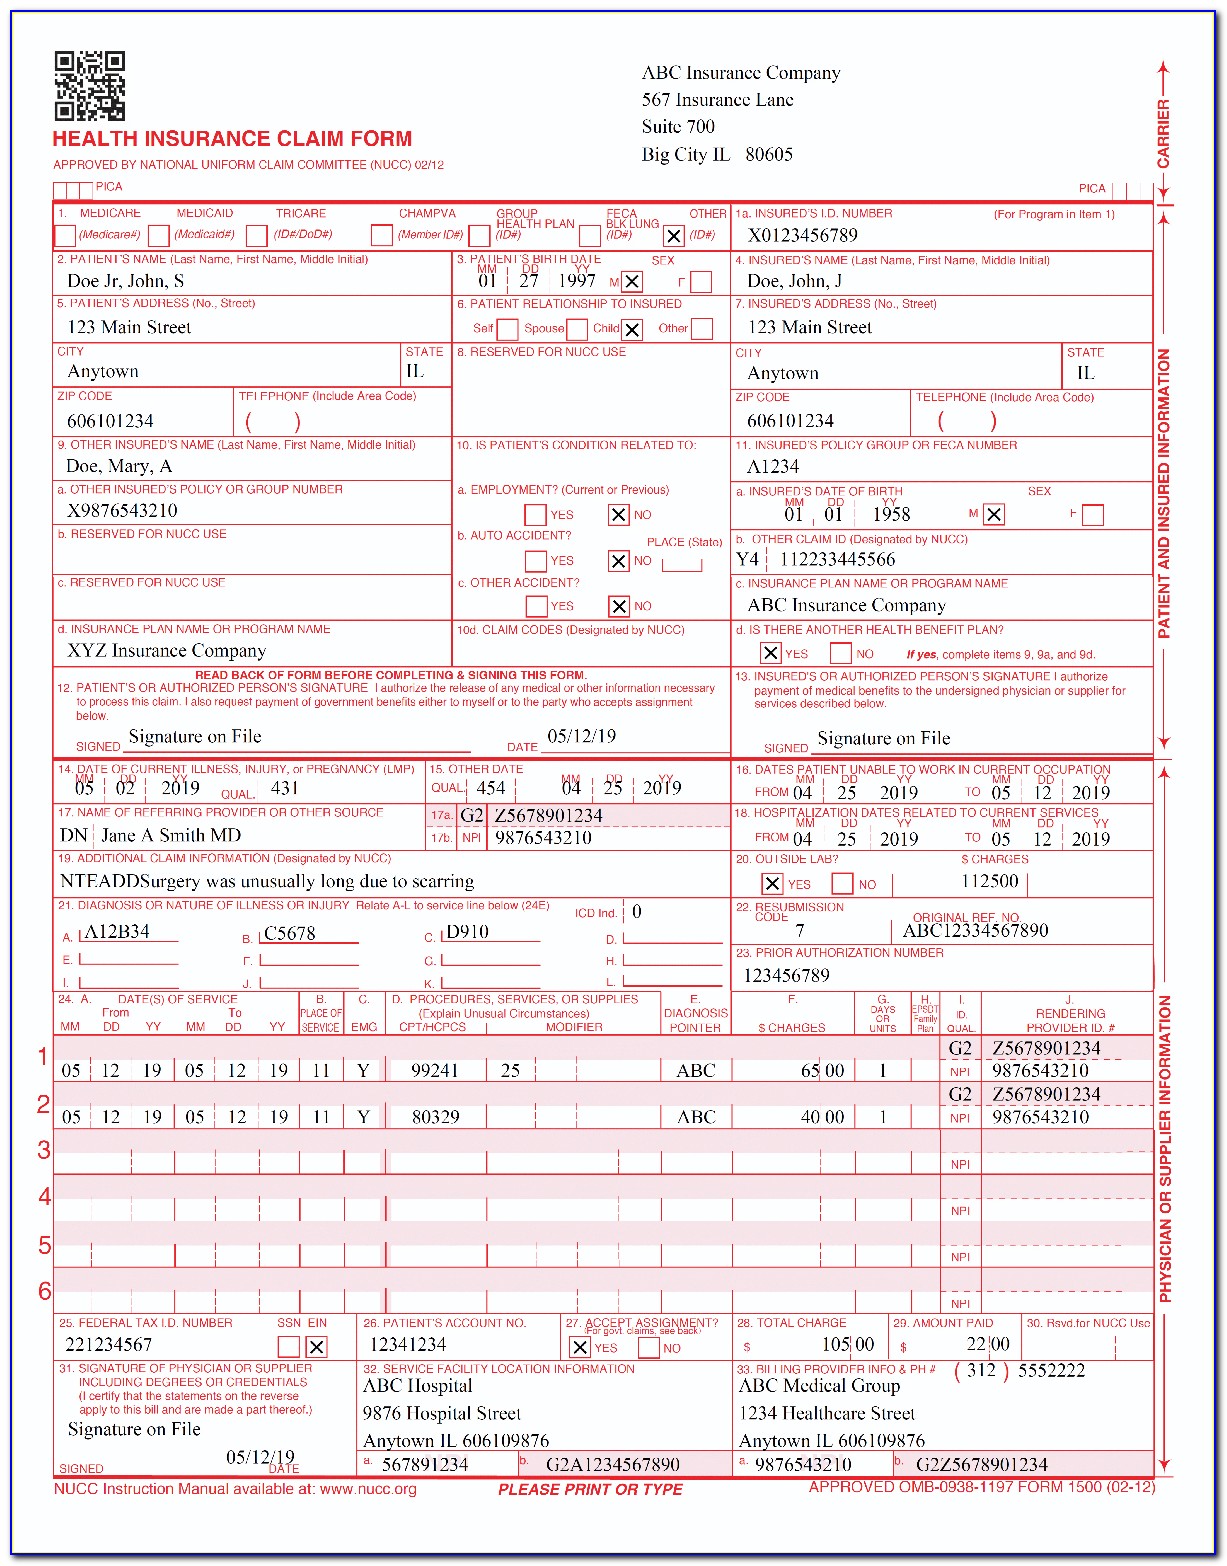 1500 Claim Form Example